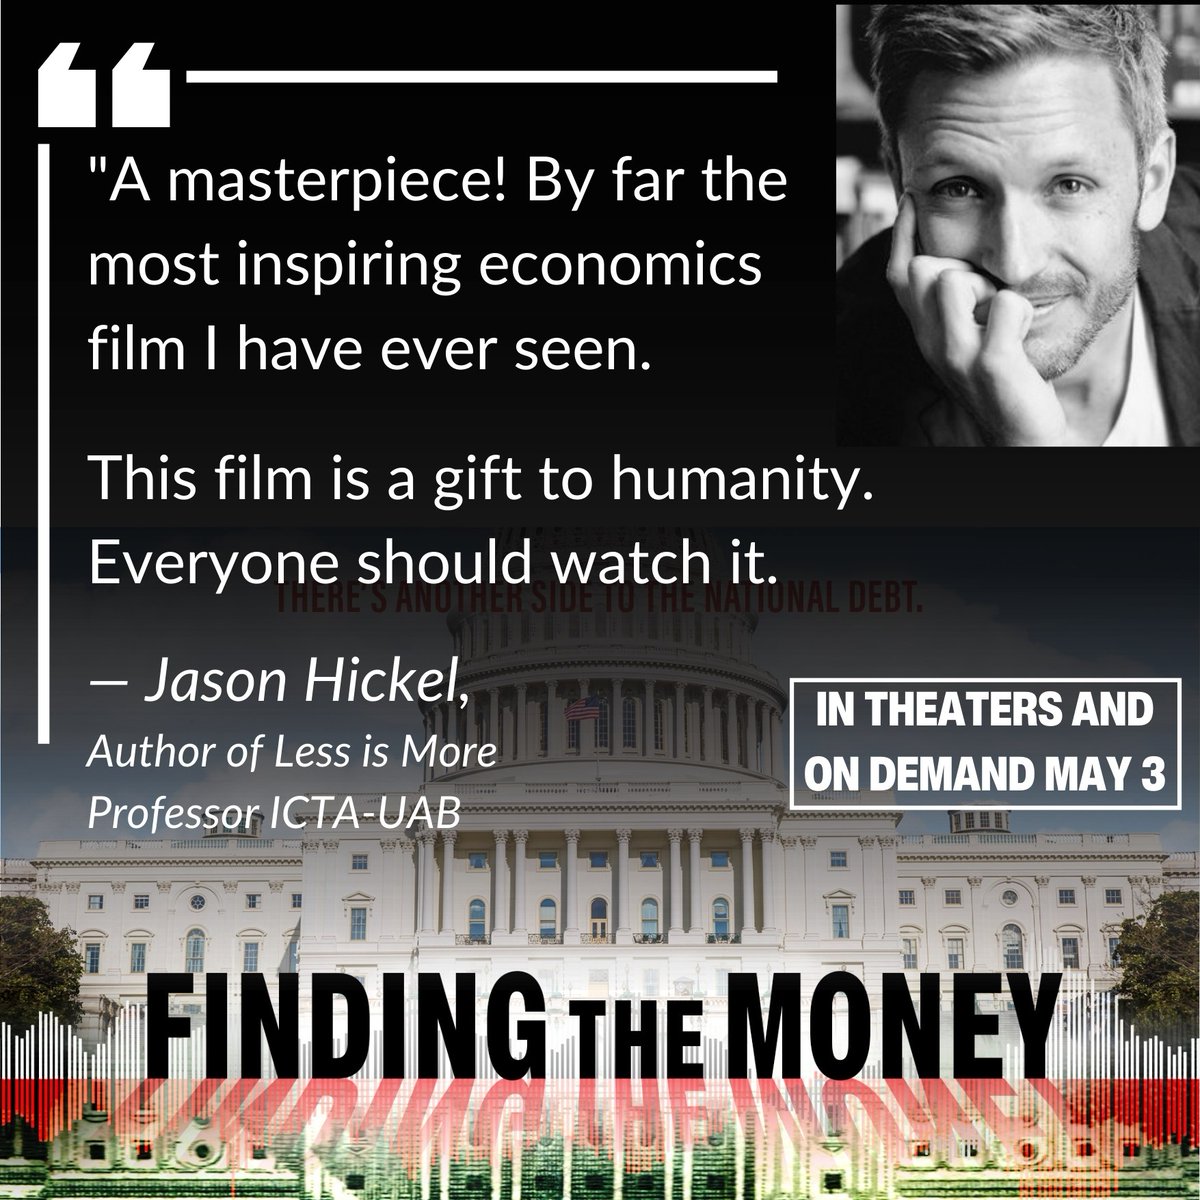 An honor to screen FINDING THE MONEY with @jasonhickel at UAB and discuss the exciting synthesis of #MMT w/ ecological economics and post growth visions for economies that thrive within planetary boundaries. The reason I made the film. COMING May 3: tinyurl.com/FTMWatch